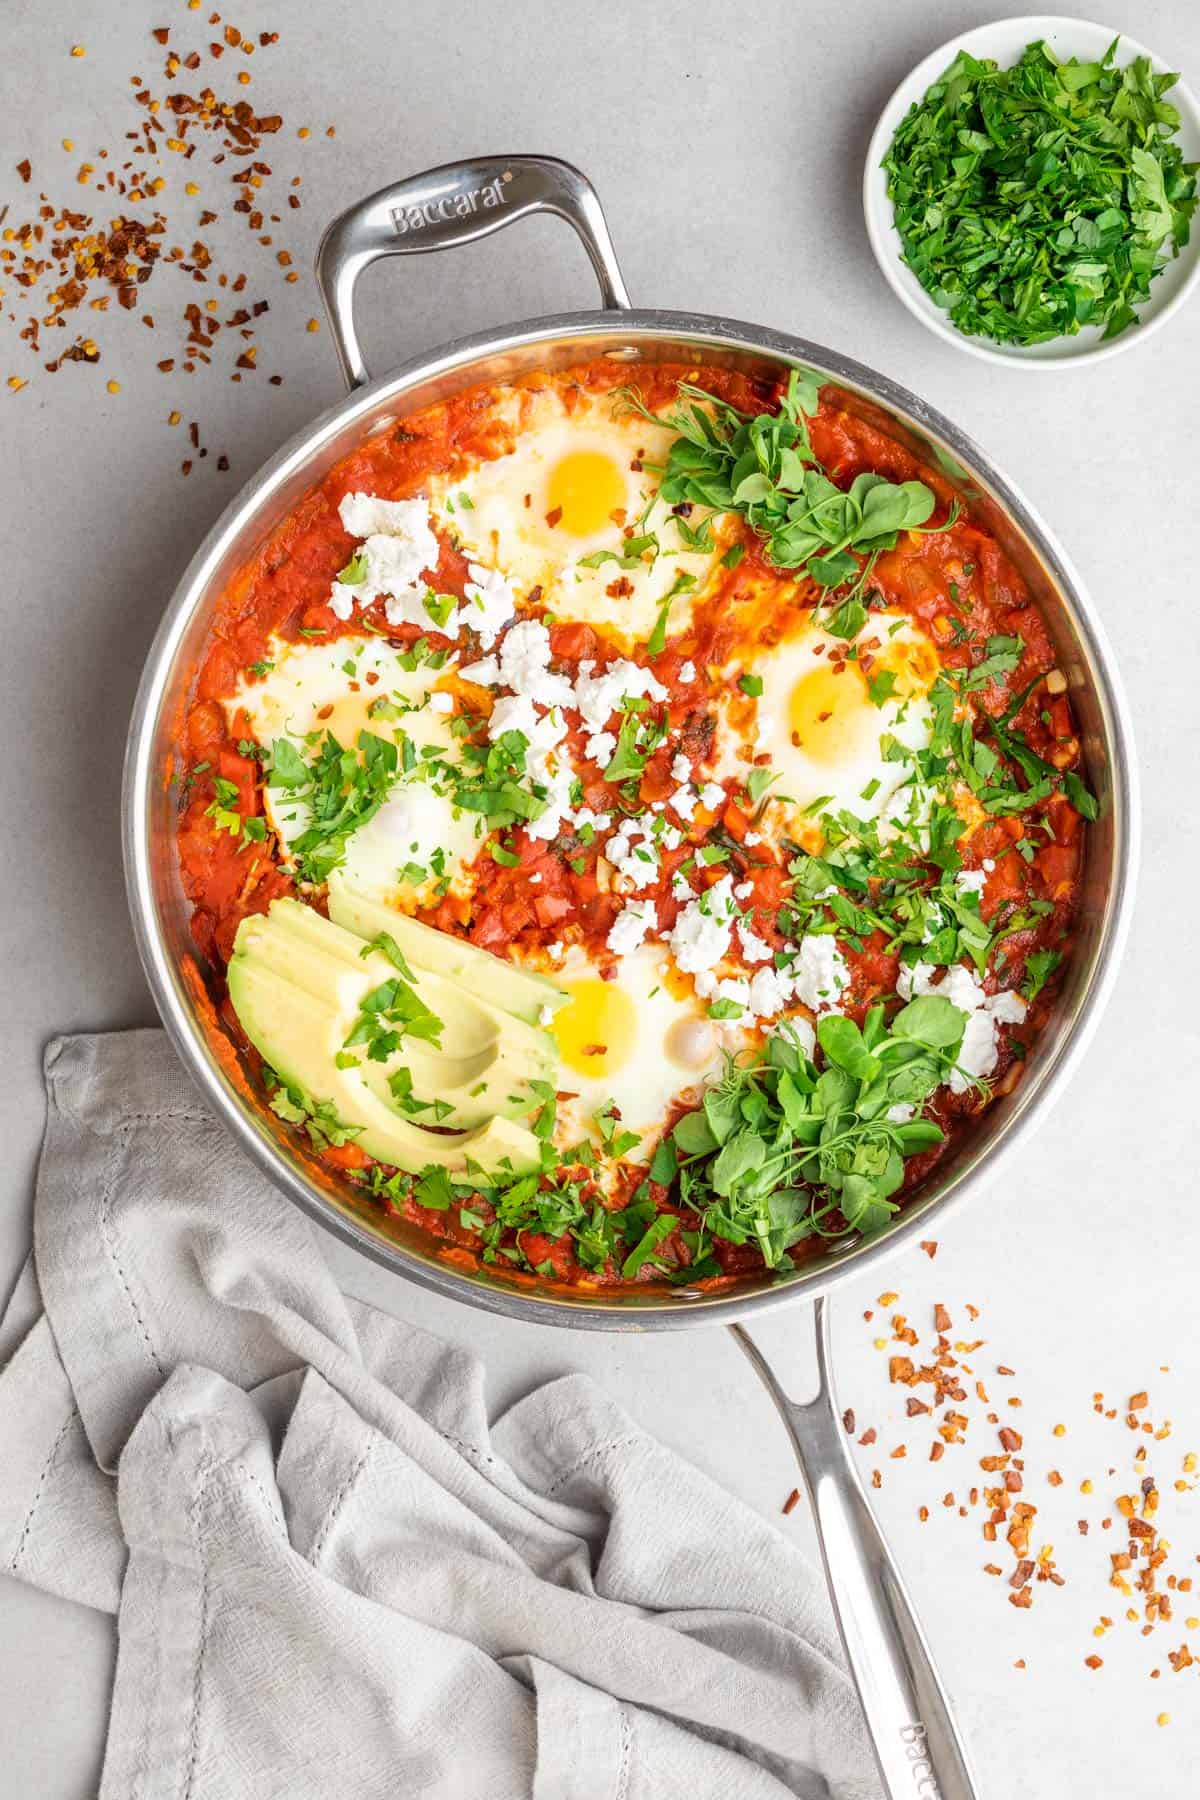 Shakshuka in a stainless steel pan with green herbs and garnishes